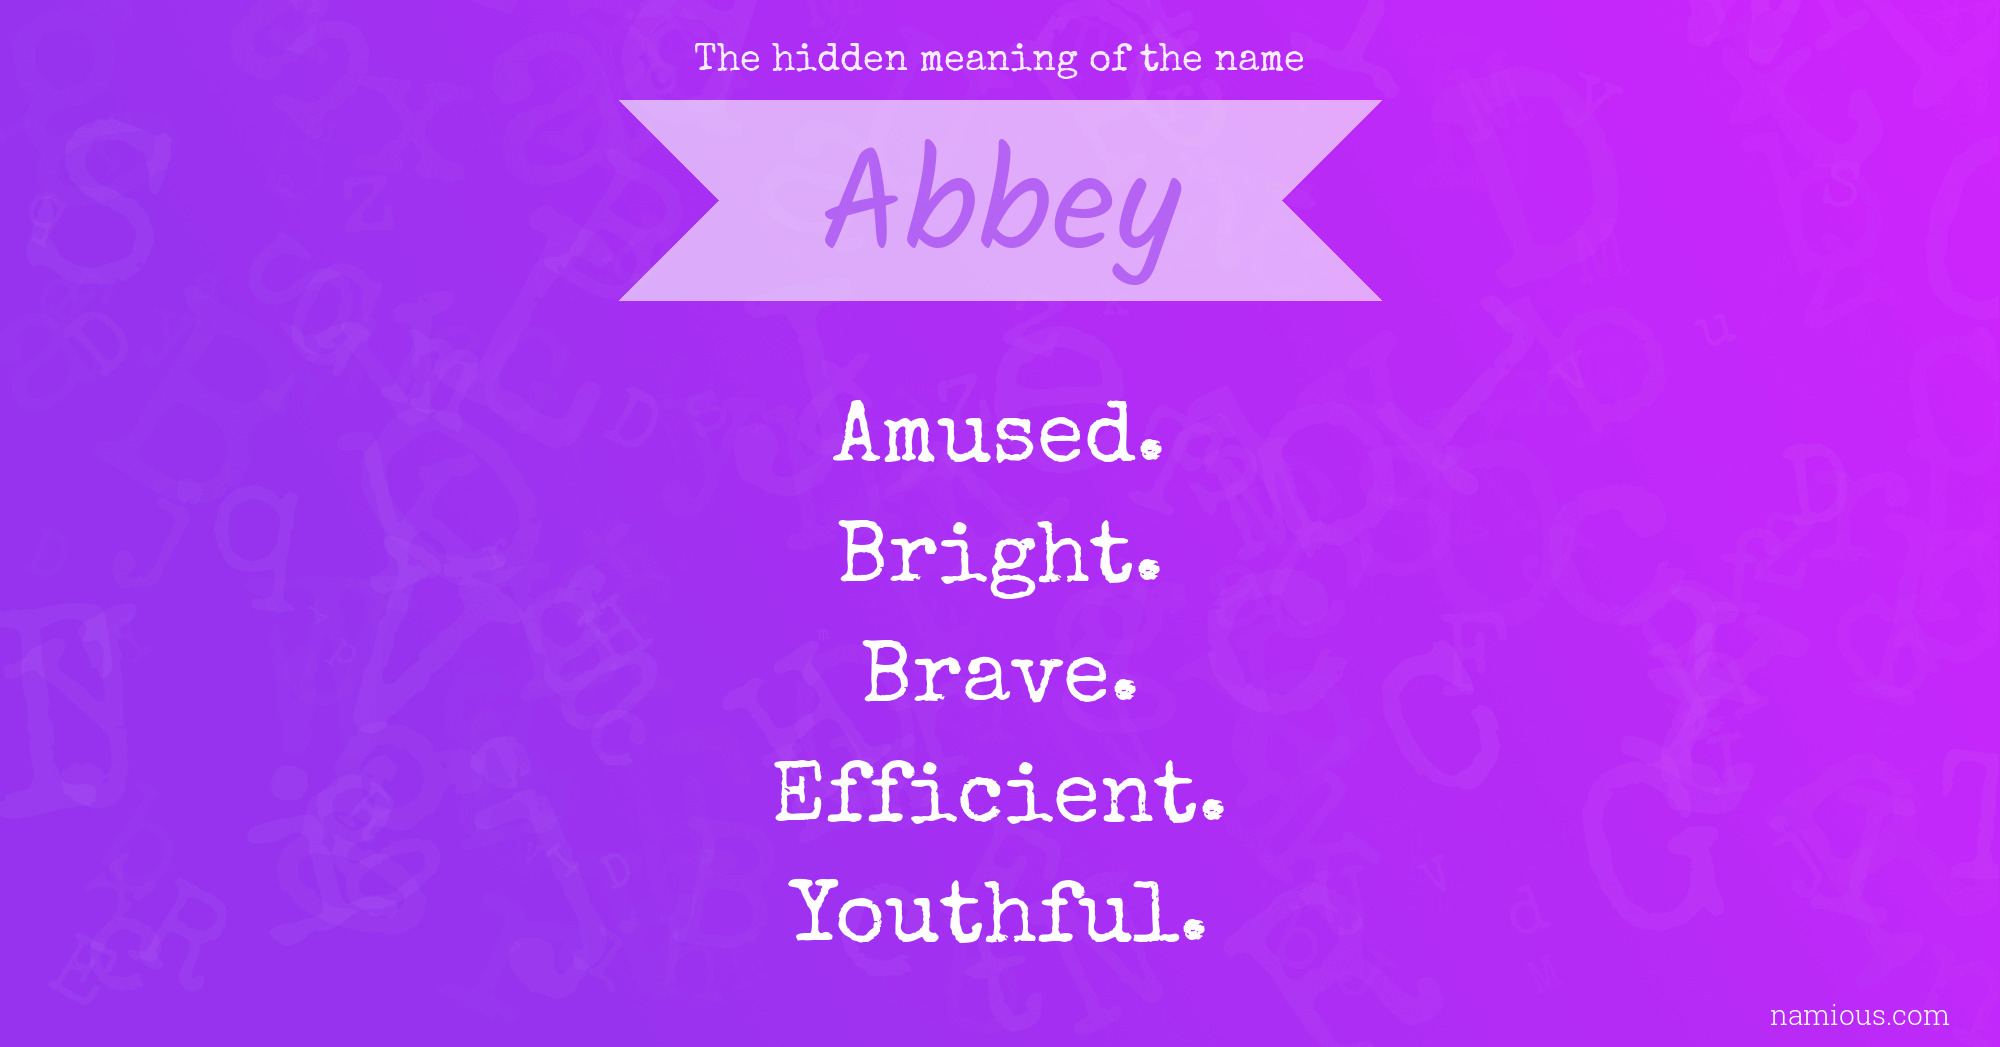 The hidden meaning of the name Abbey